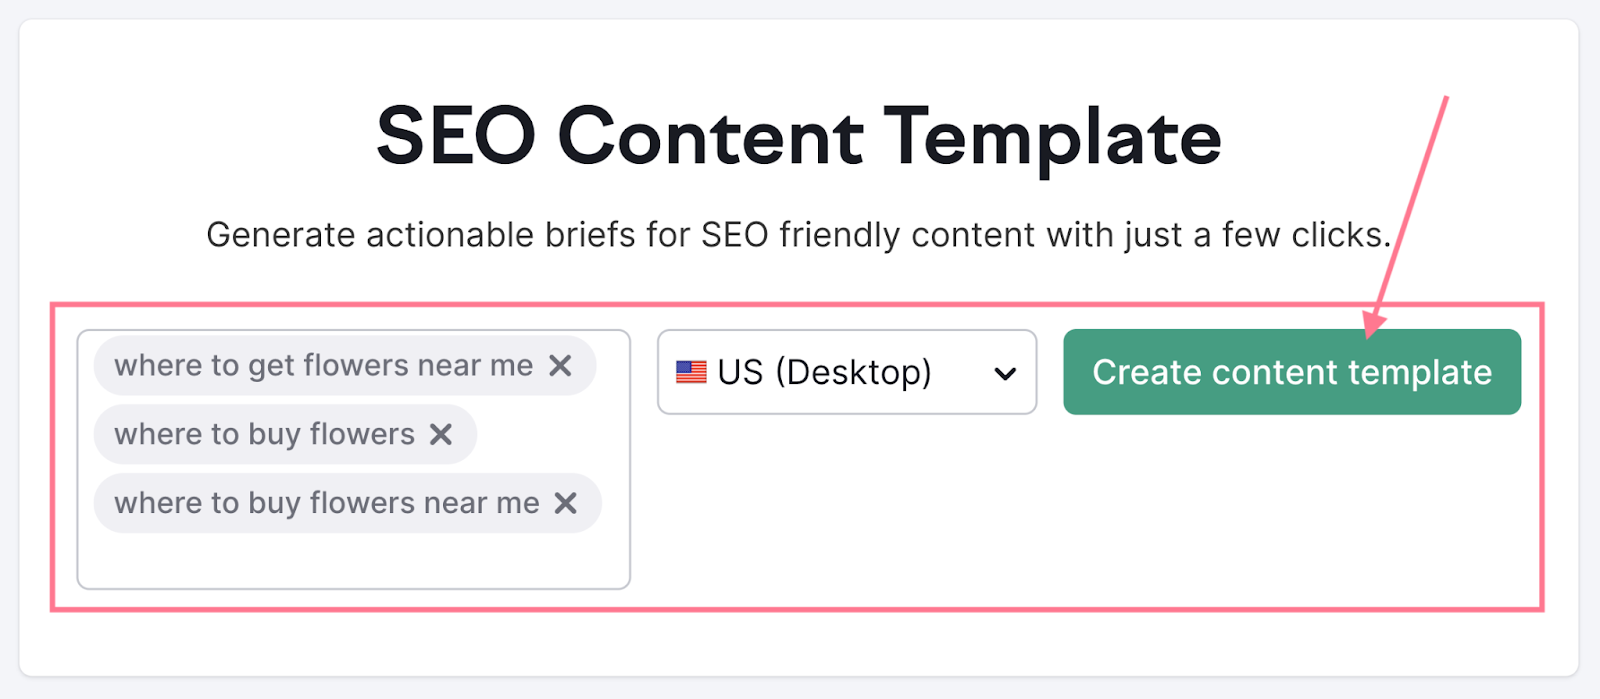 SEO Content Template tool